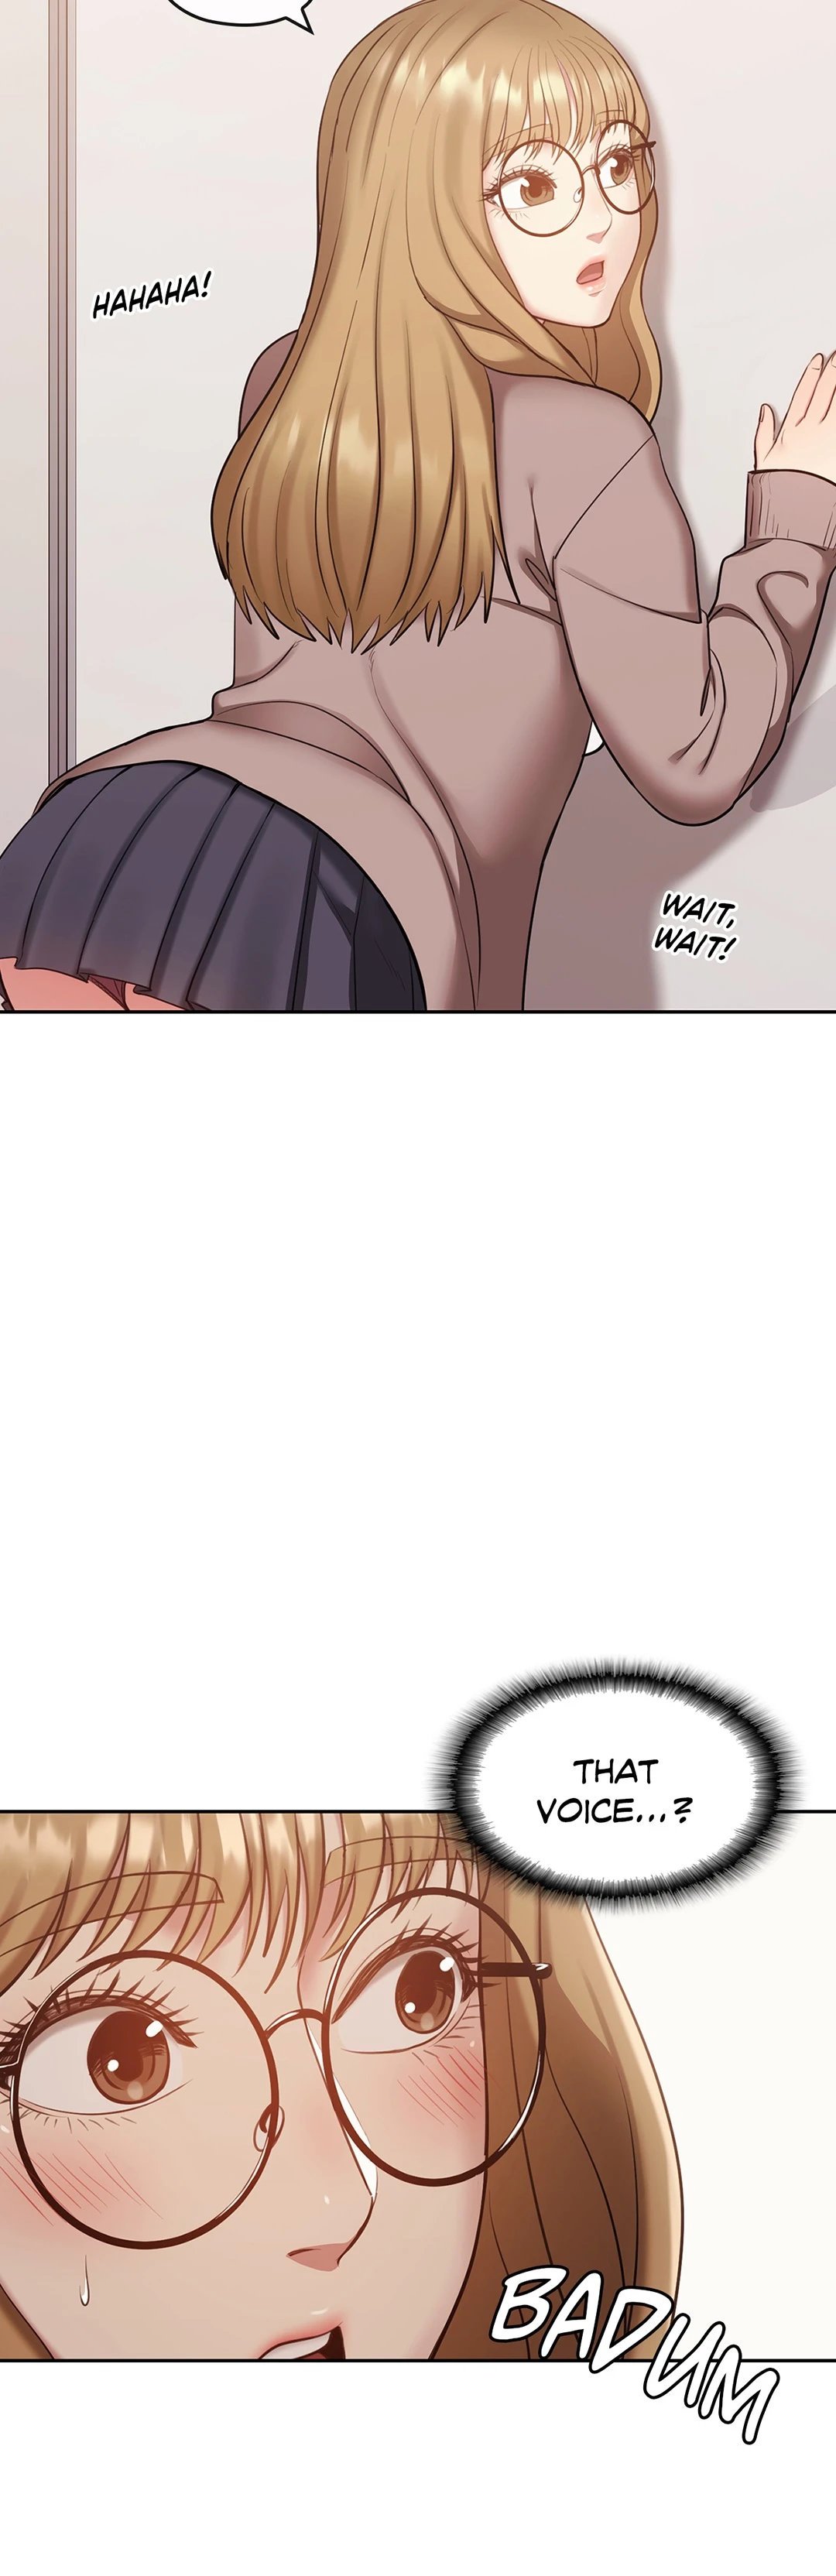 sexual-consulting-chap-34-2